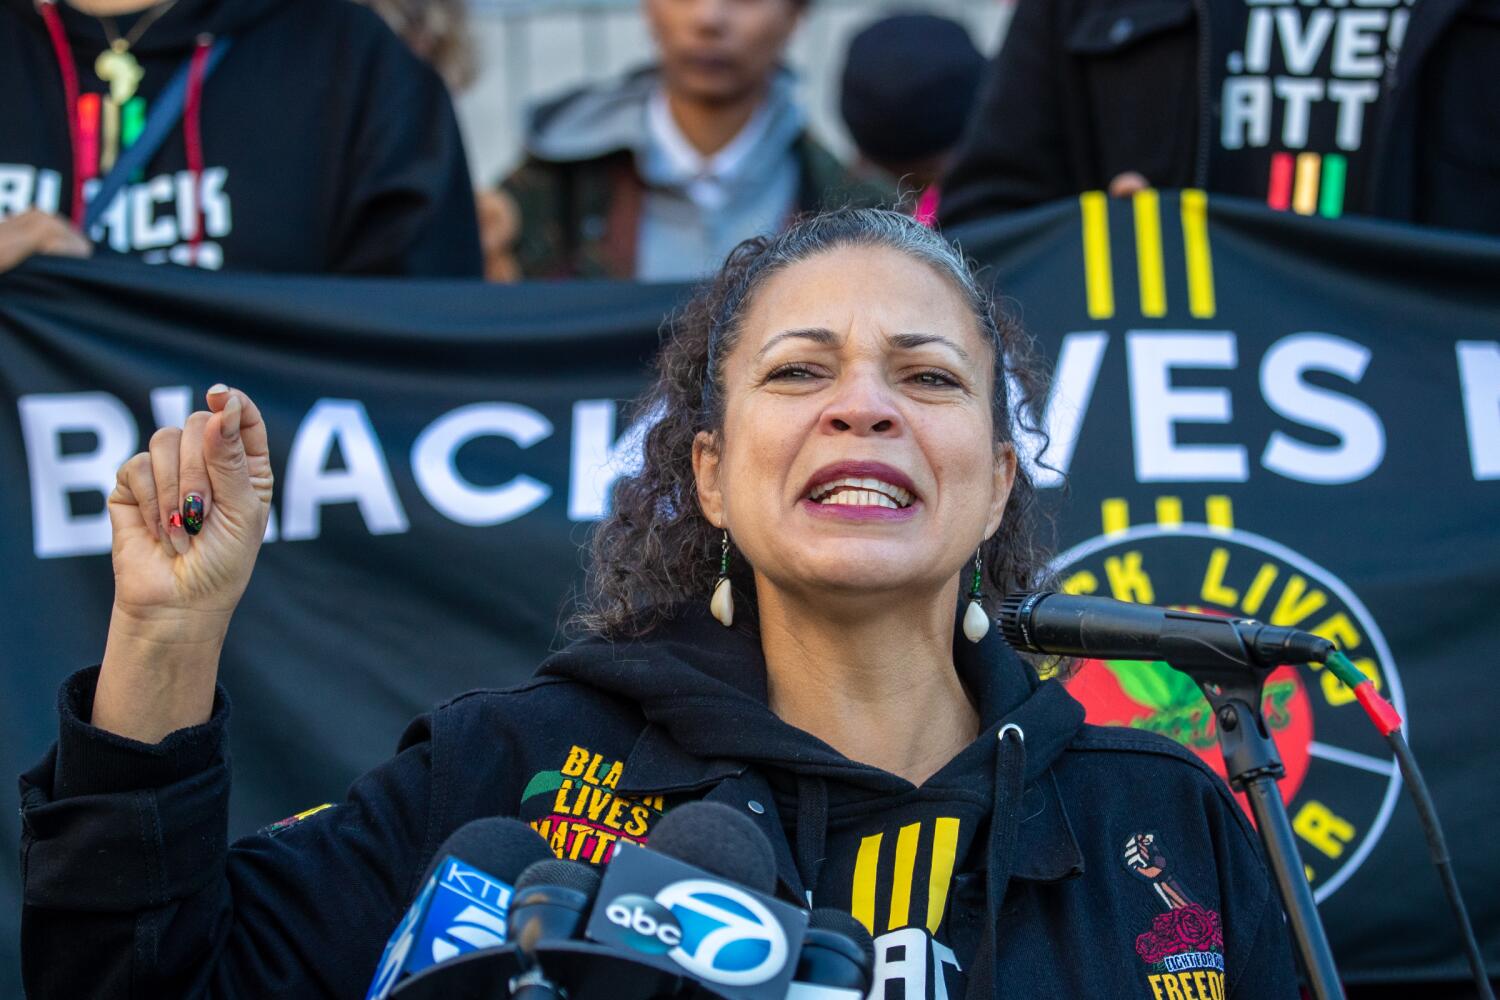 Cornel West selects L.A. professor and activist Melina Abdullah as presidential running mate